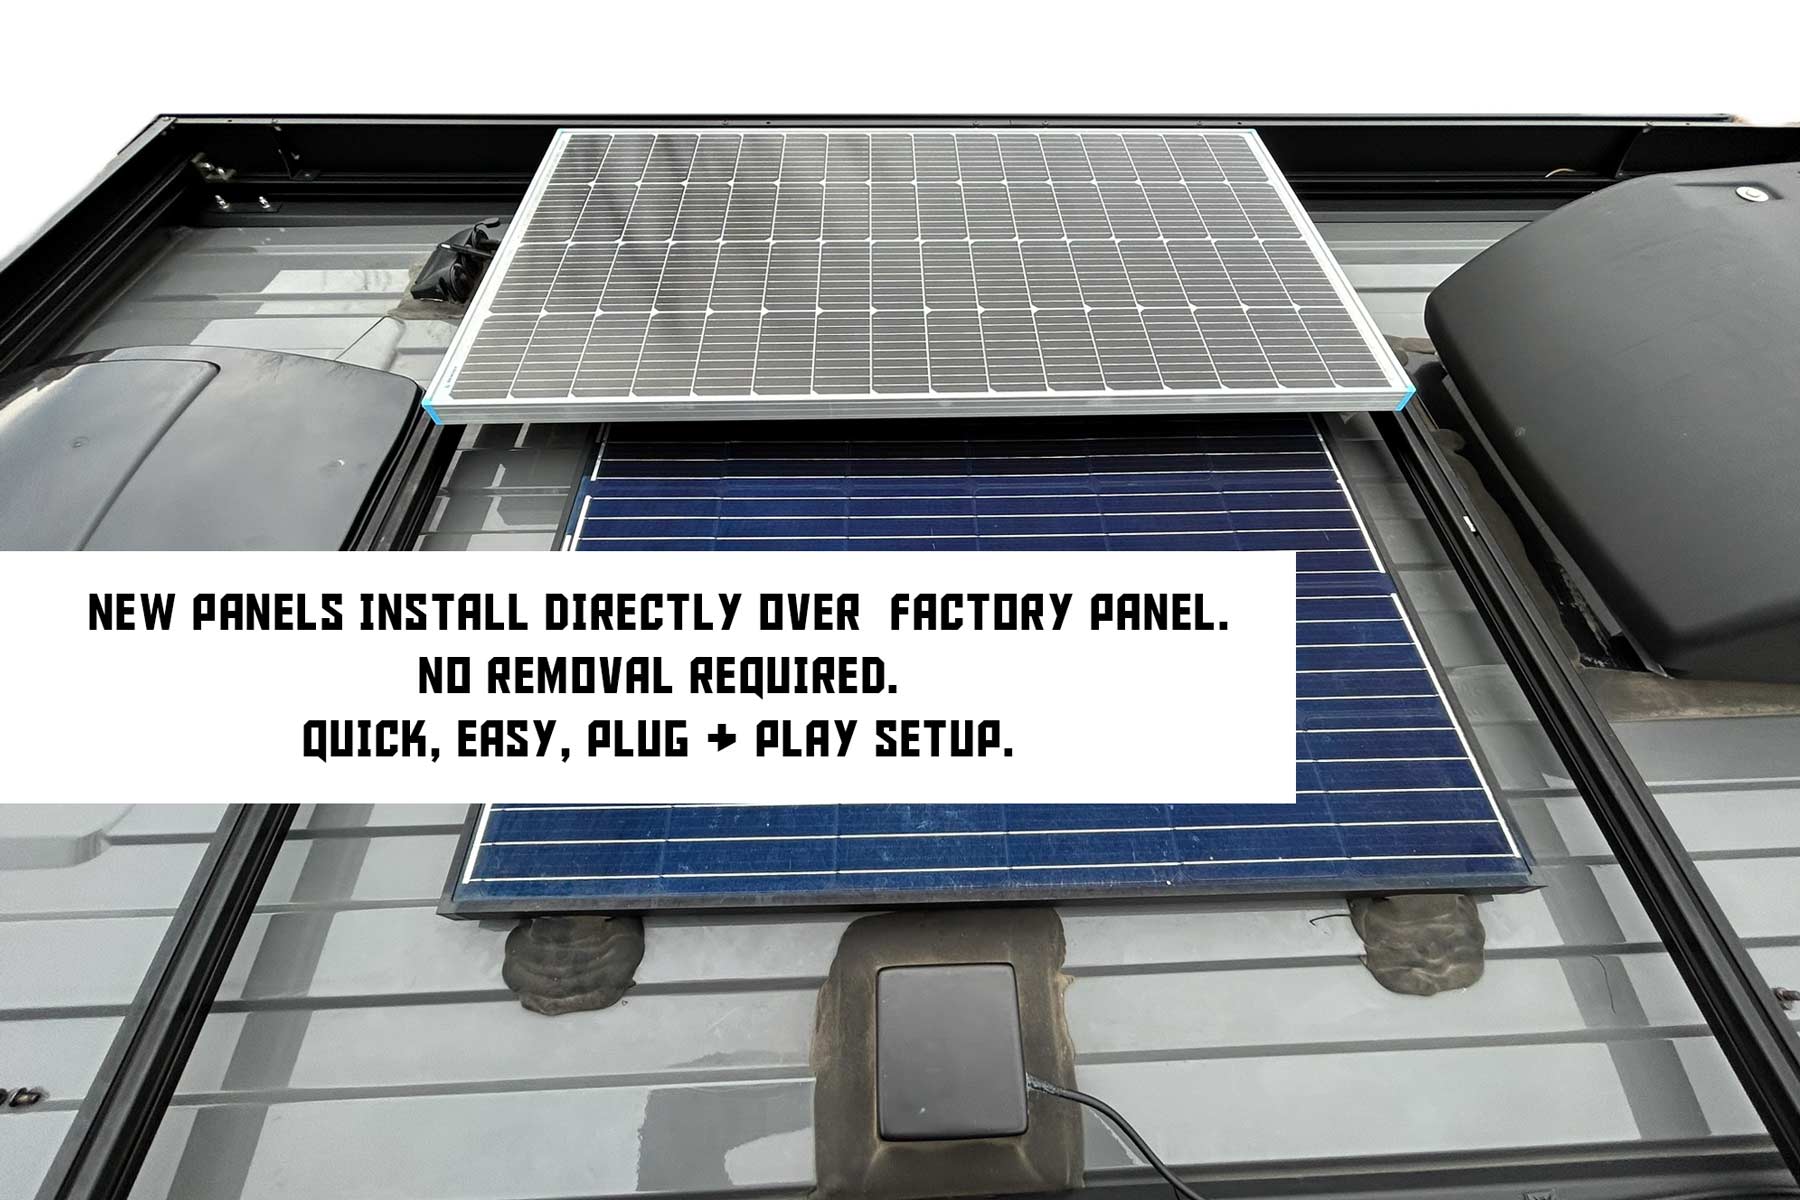 new solar panels install directly over factory panel. No removal necessary. Plug and play